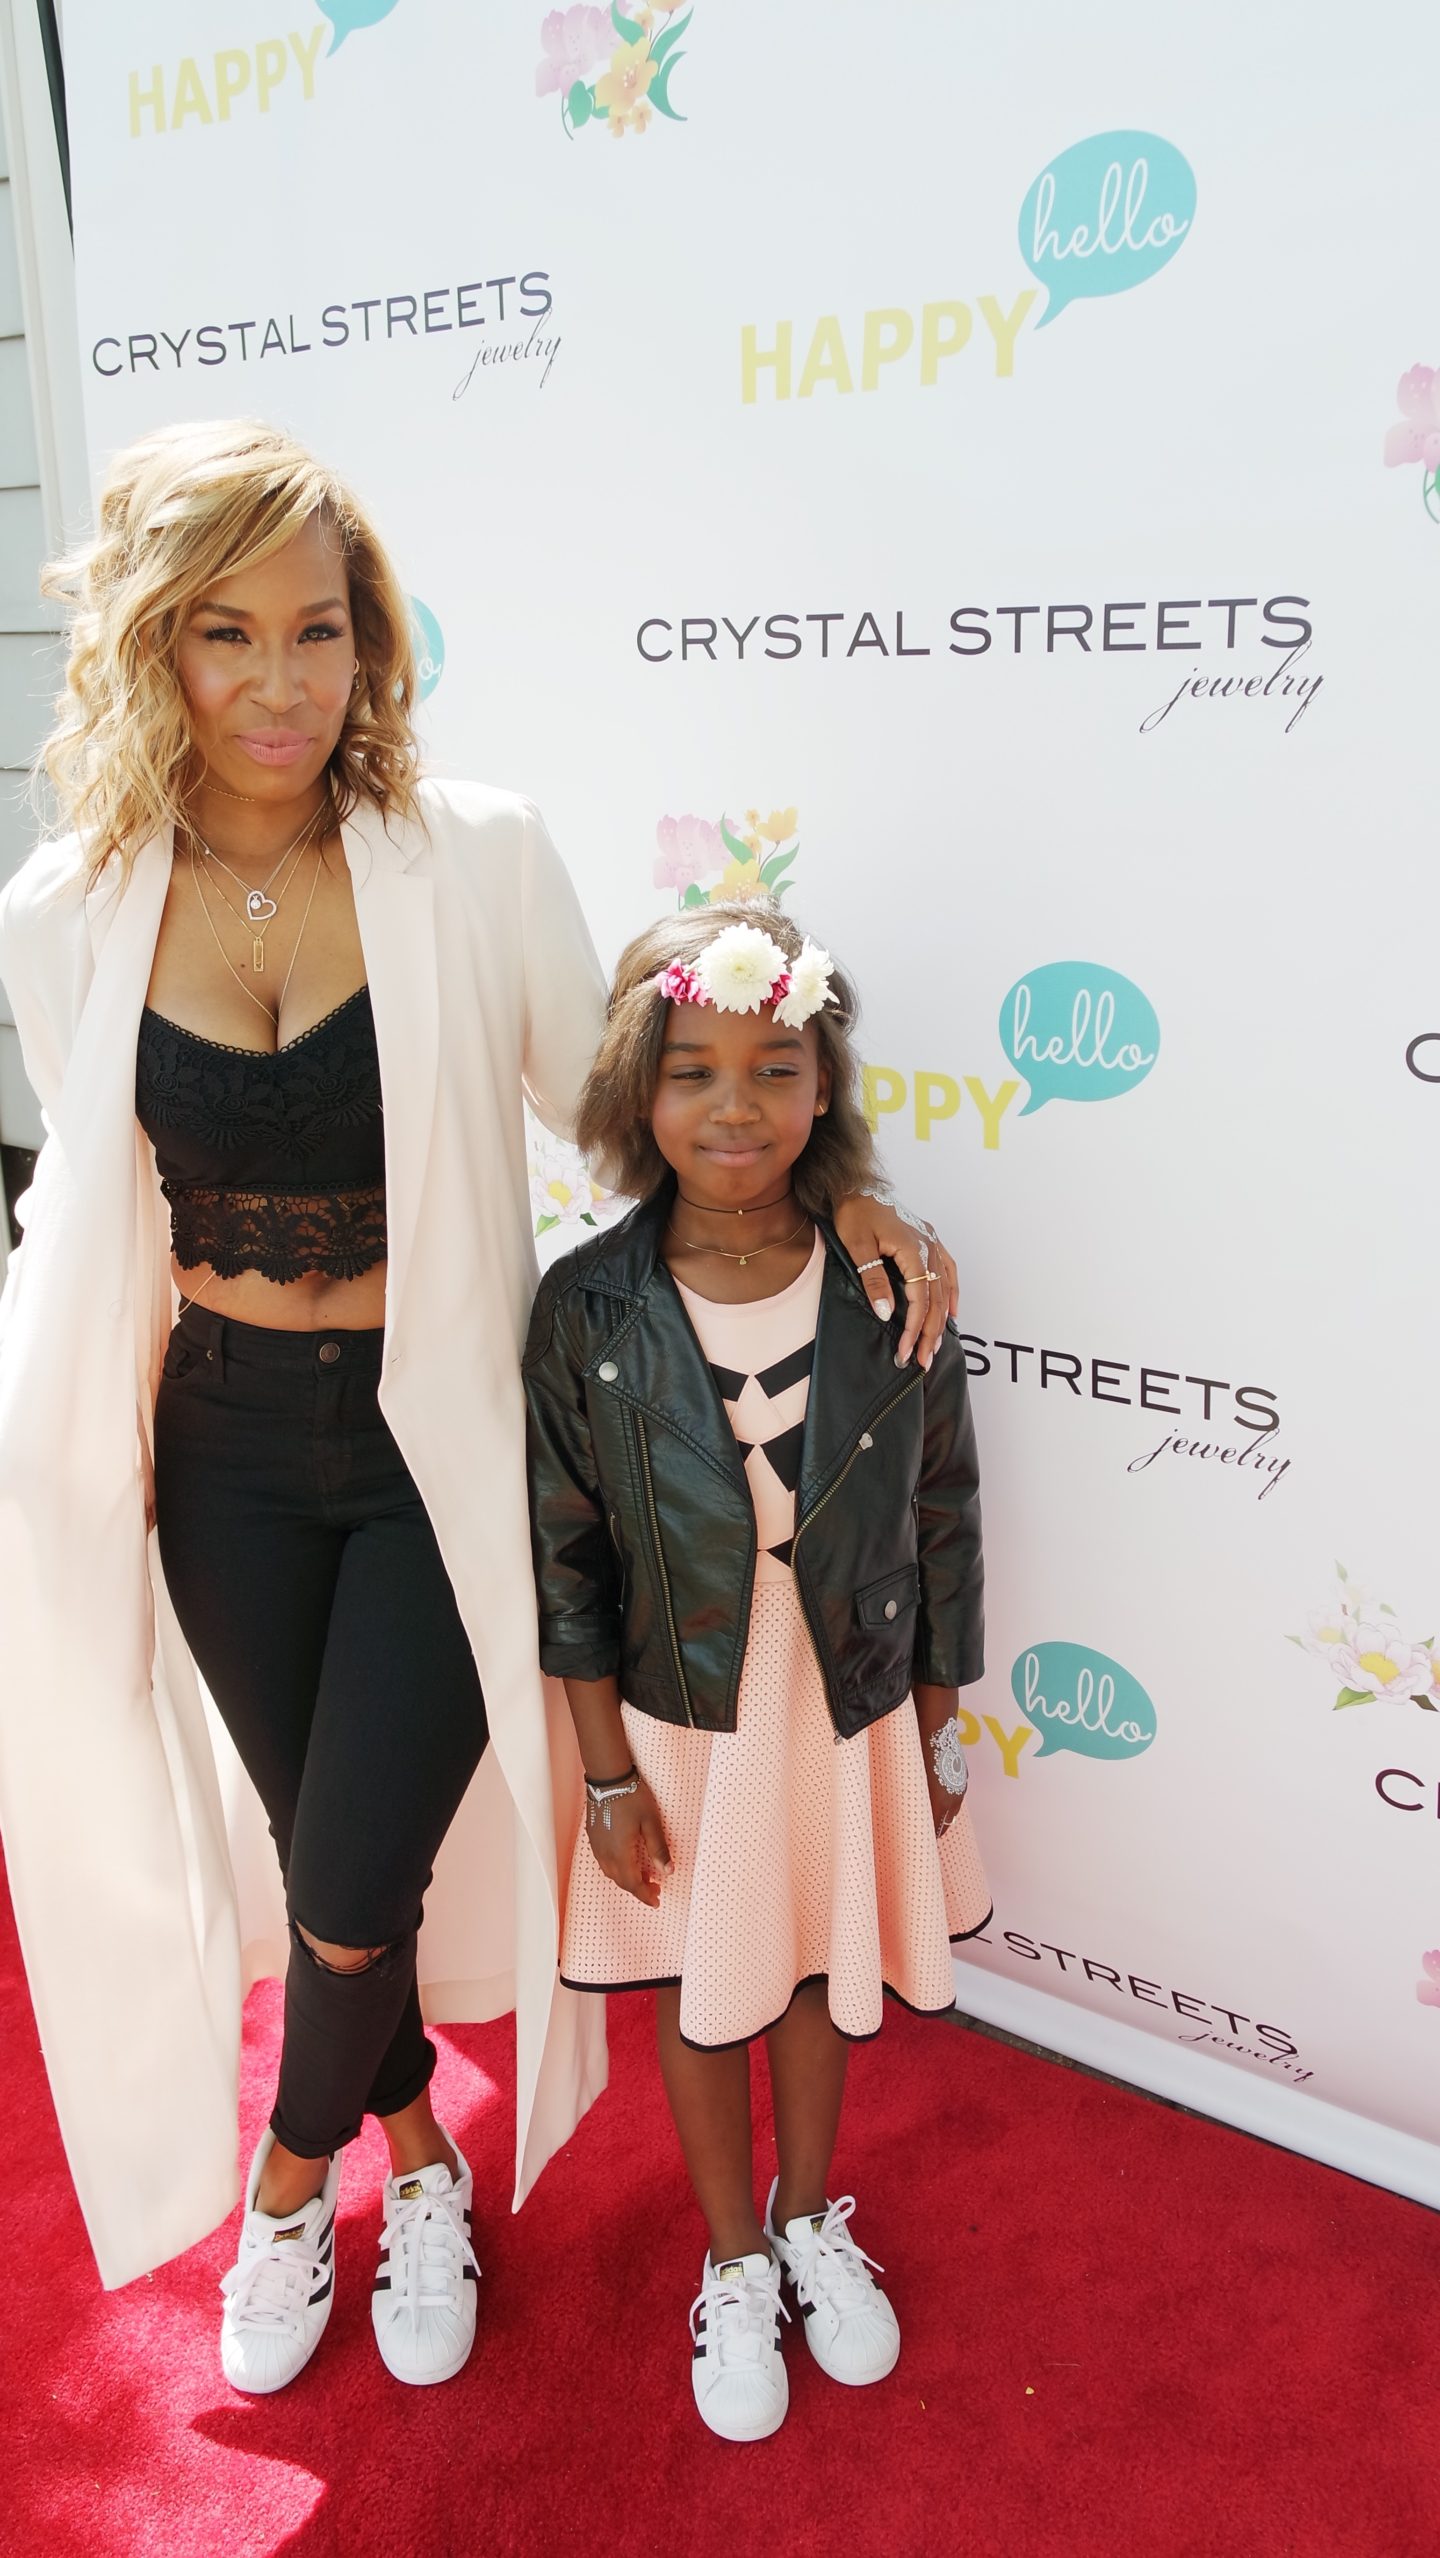 Crystal Streets Jewelry Presents: Mommy N’ Me, By Lyra & Crystal